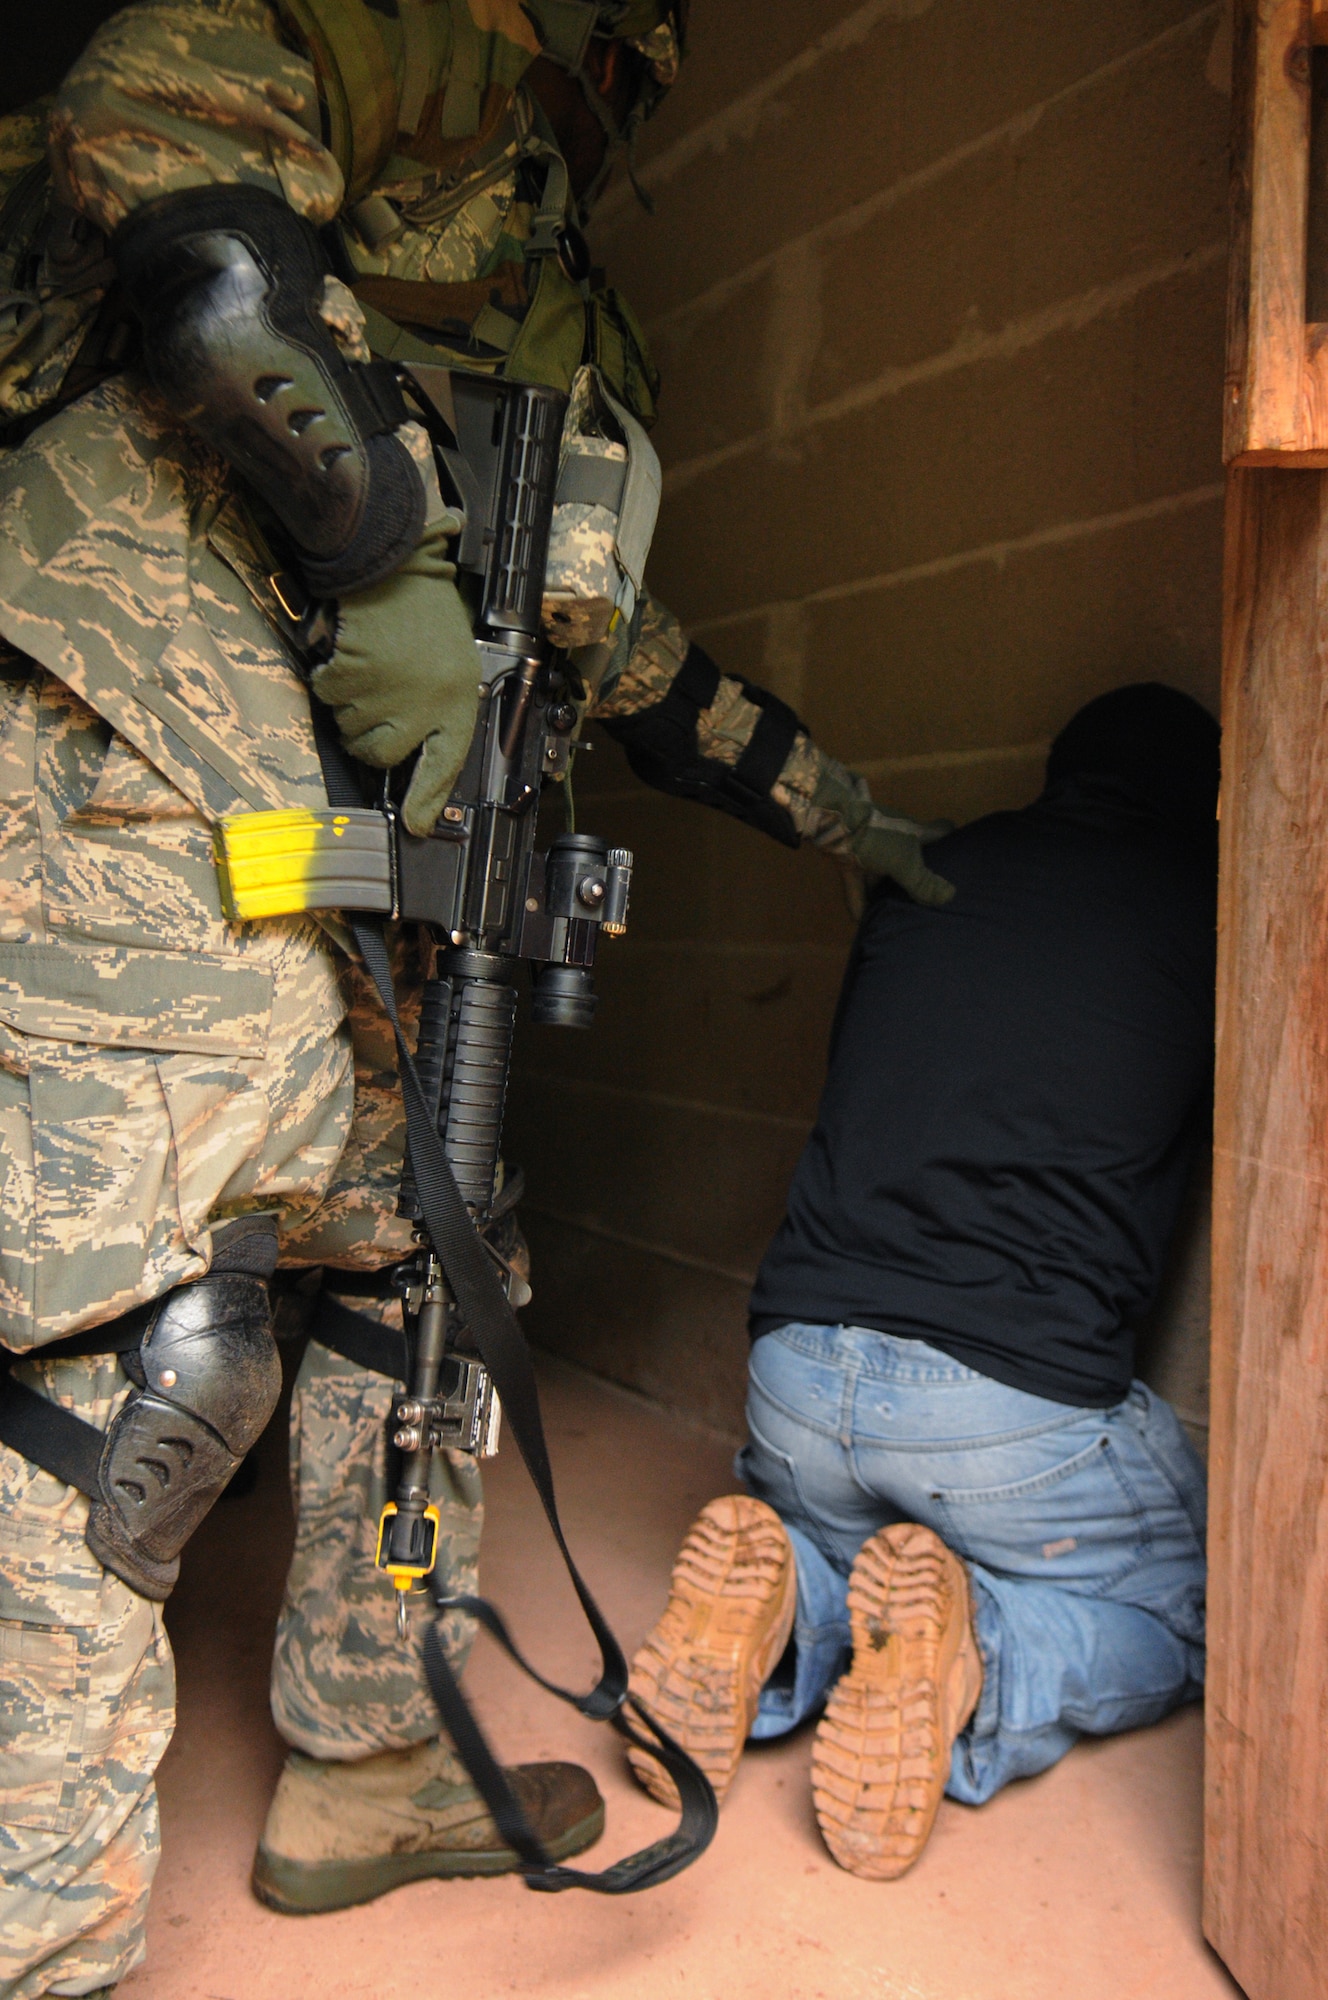 A suspected insurgent is searched during Creek Defender, Baumholder, Germany, May 15, 2009. Students attend Creek Defender Regional Training Center to hone and sharpen skills learned through previous training in preparation for upcoming deployments. (U.S Air Force photo by Senior Airman Levi Riendeau)